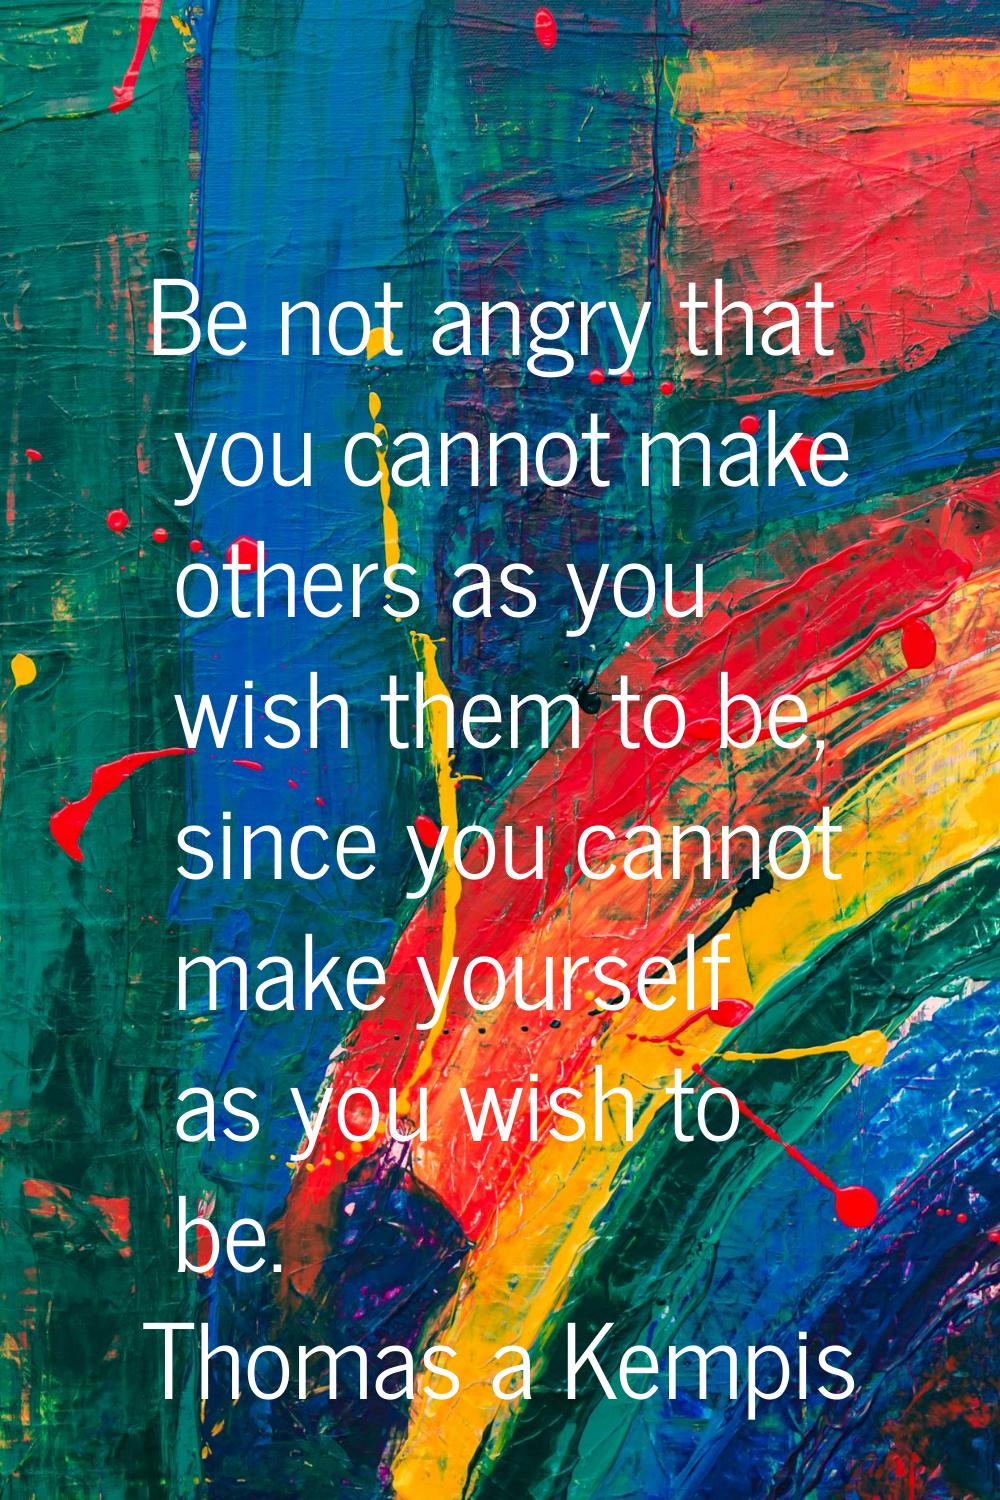 Be not angry that you cannot make others as you wish them to be, since you cannot make yourself as 